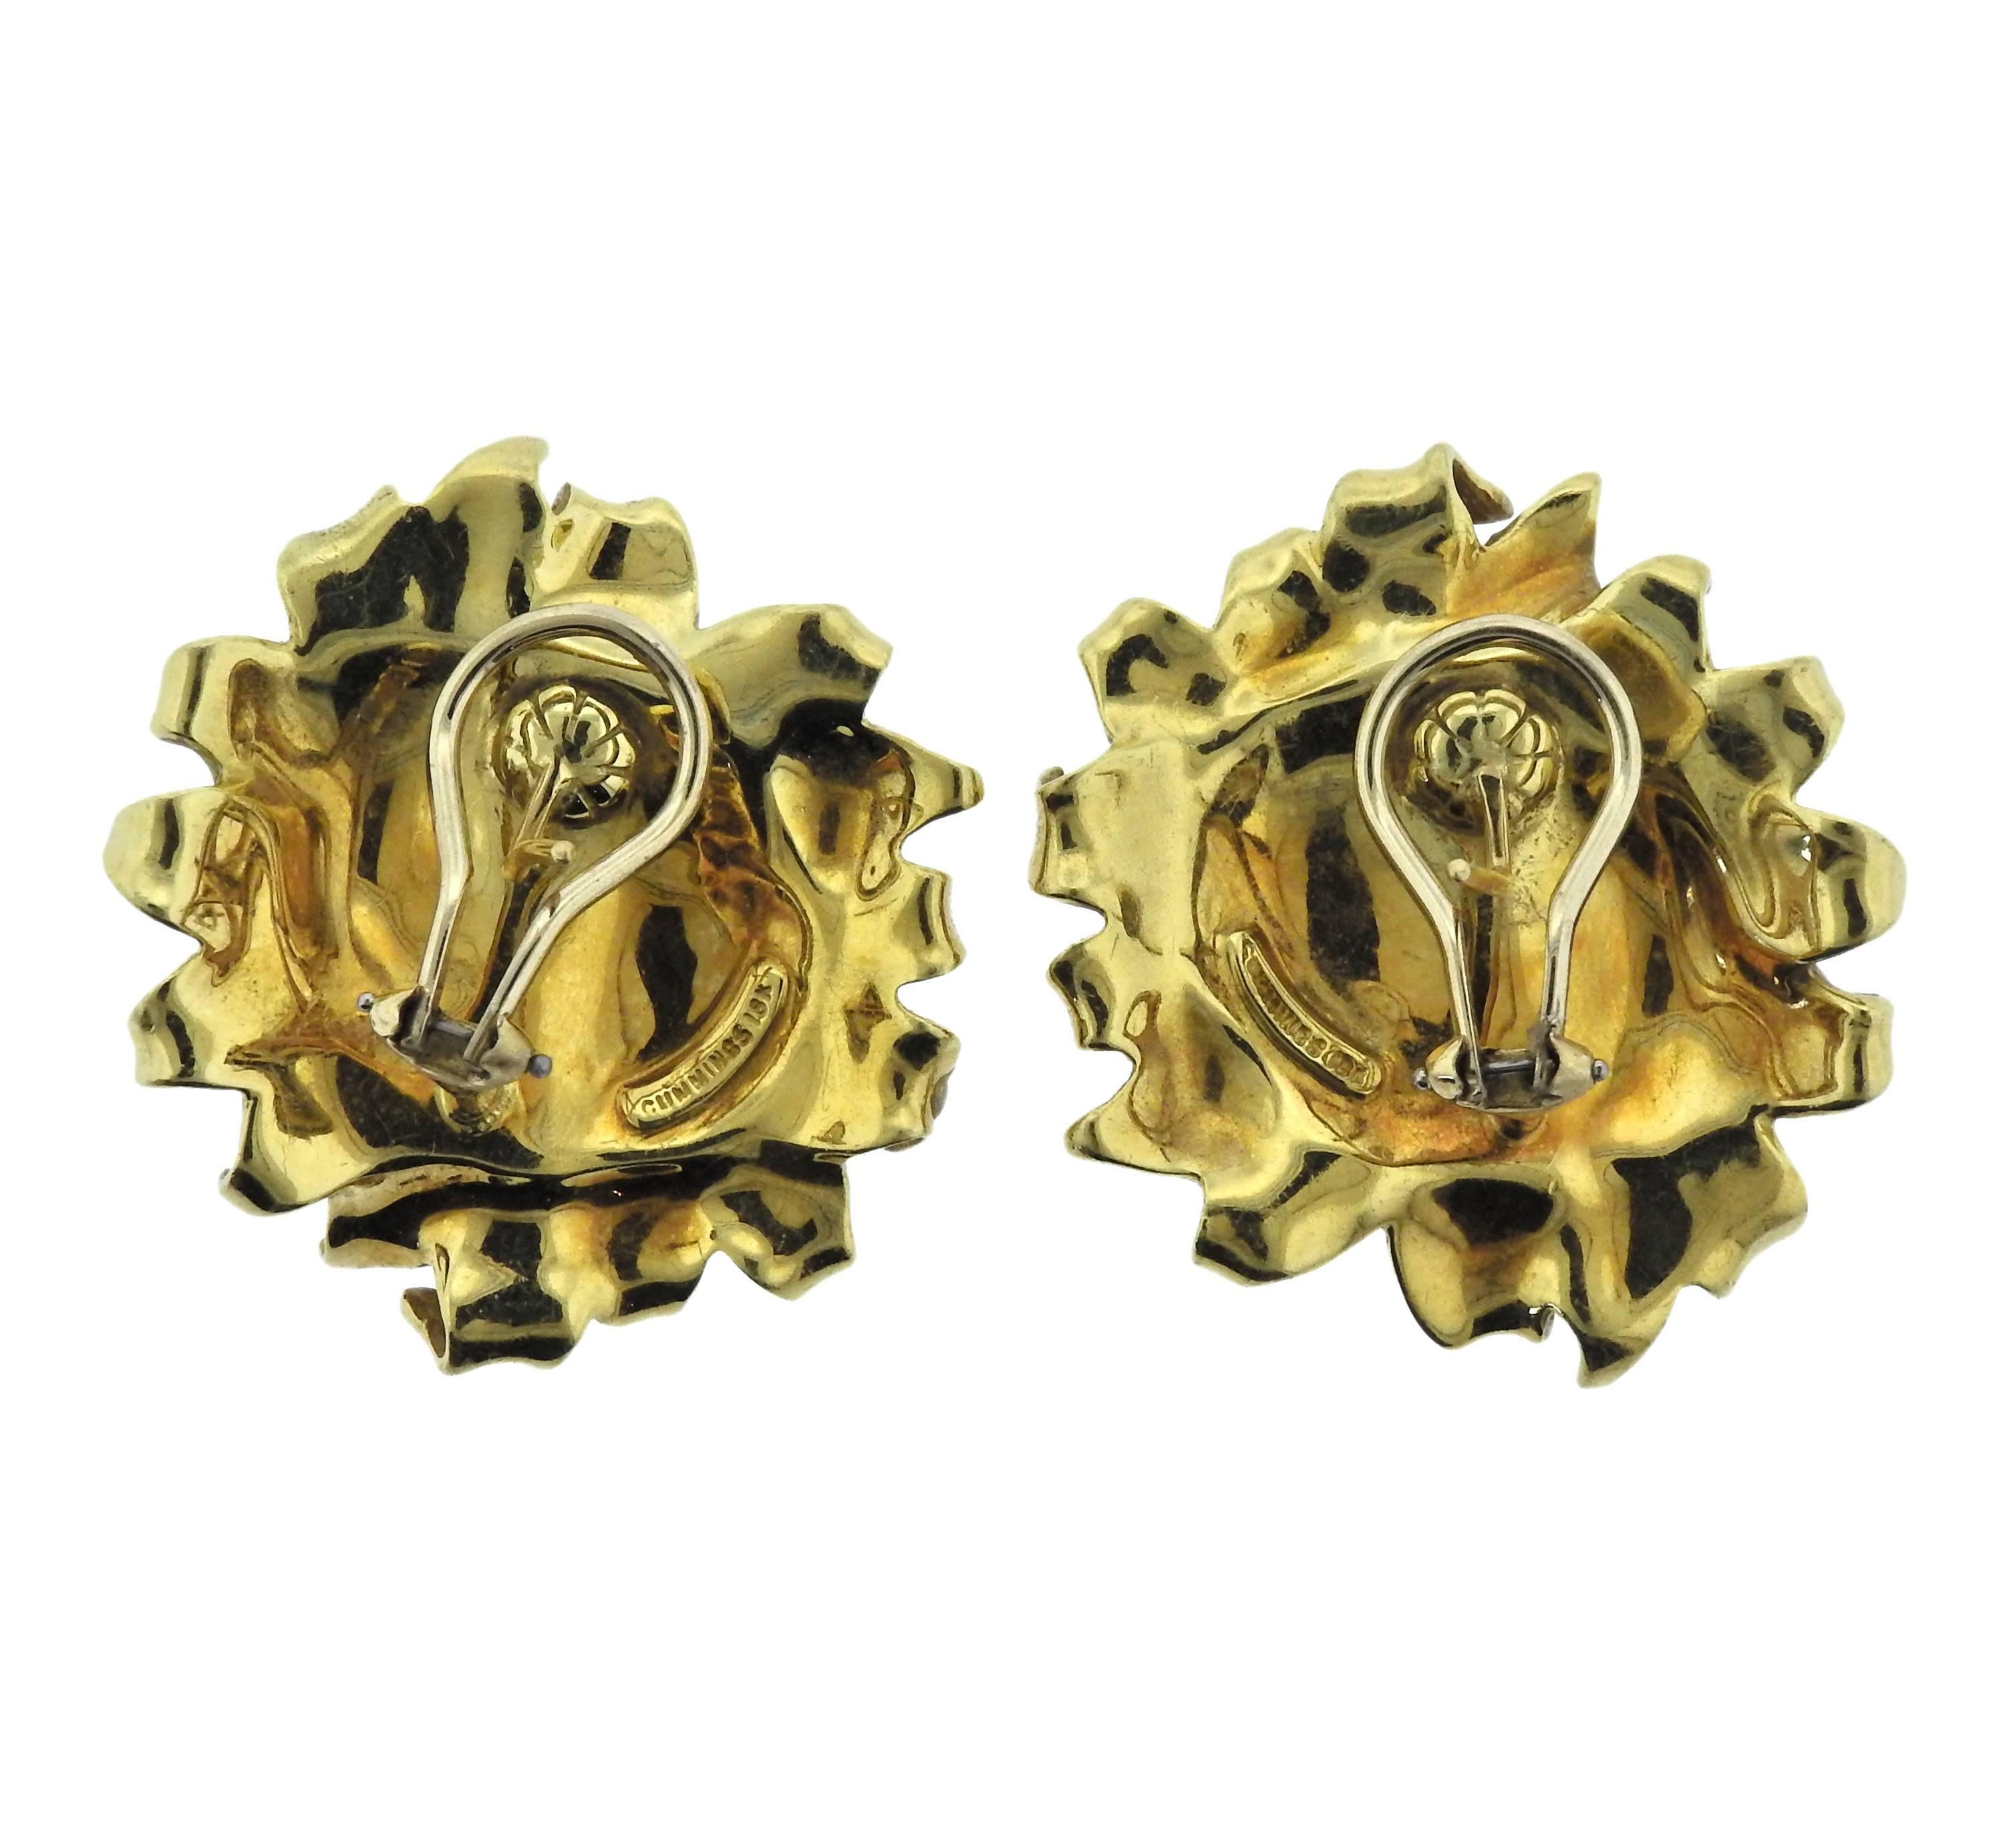  Pair of large 18k gold sunflower earrings, crafted by Angela Cummings, decorated with enamel.  Earrings are 36mm x 32mm, weigh 30.8 grams. Marked: Cummings, 18k.